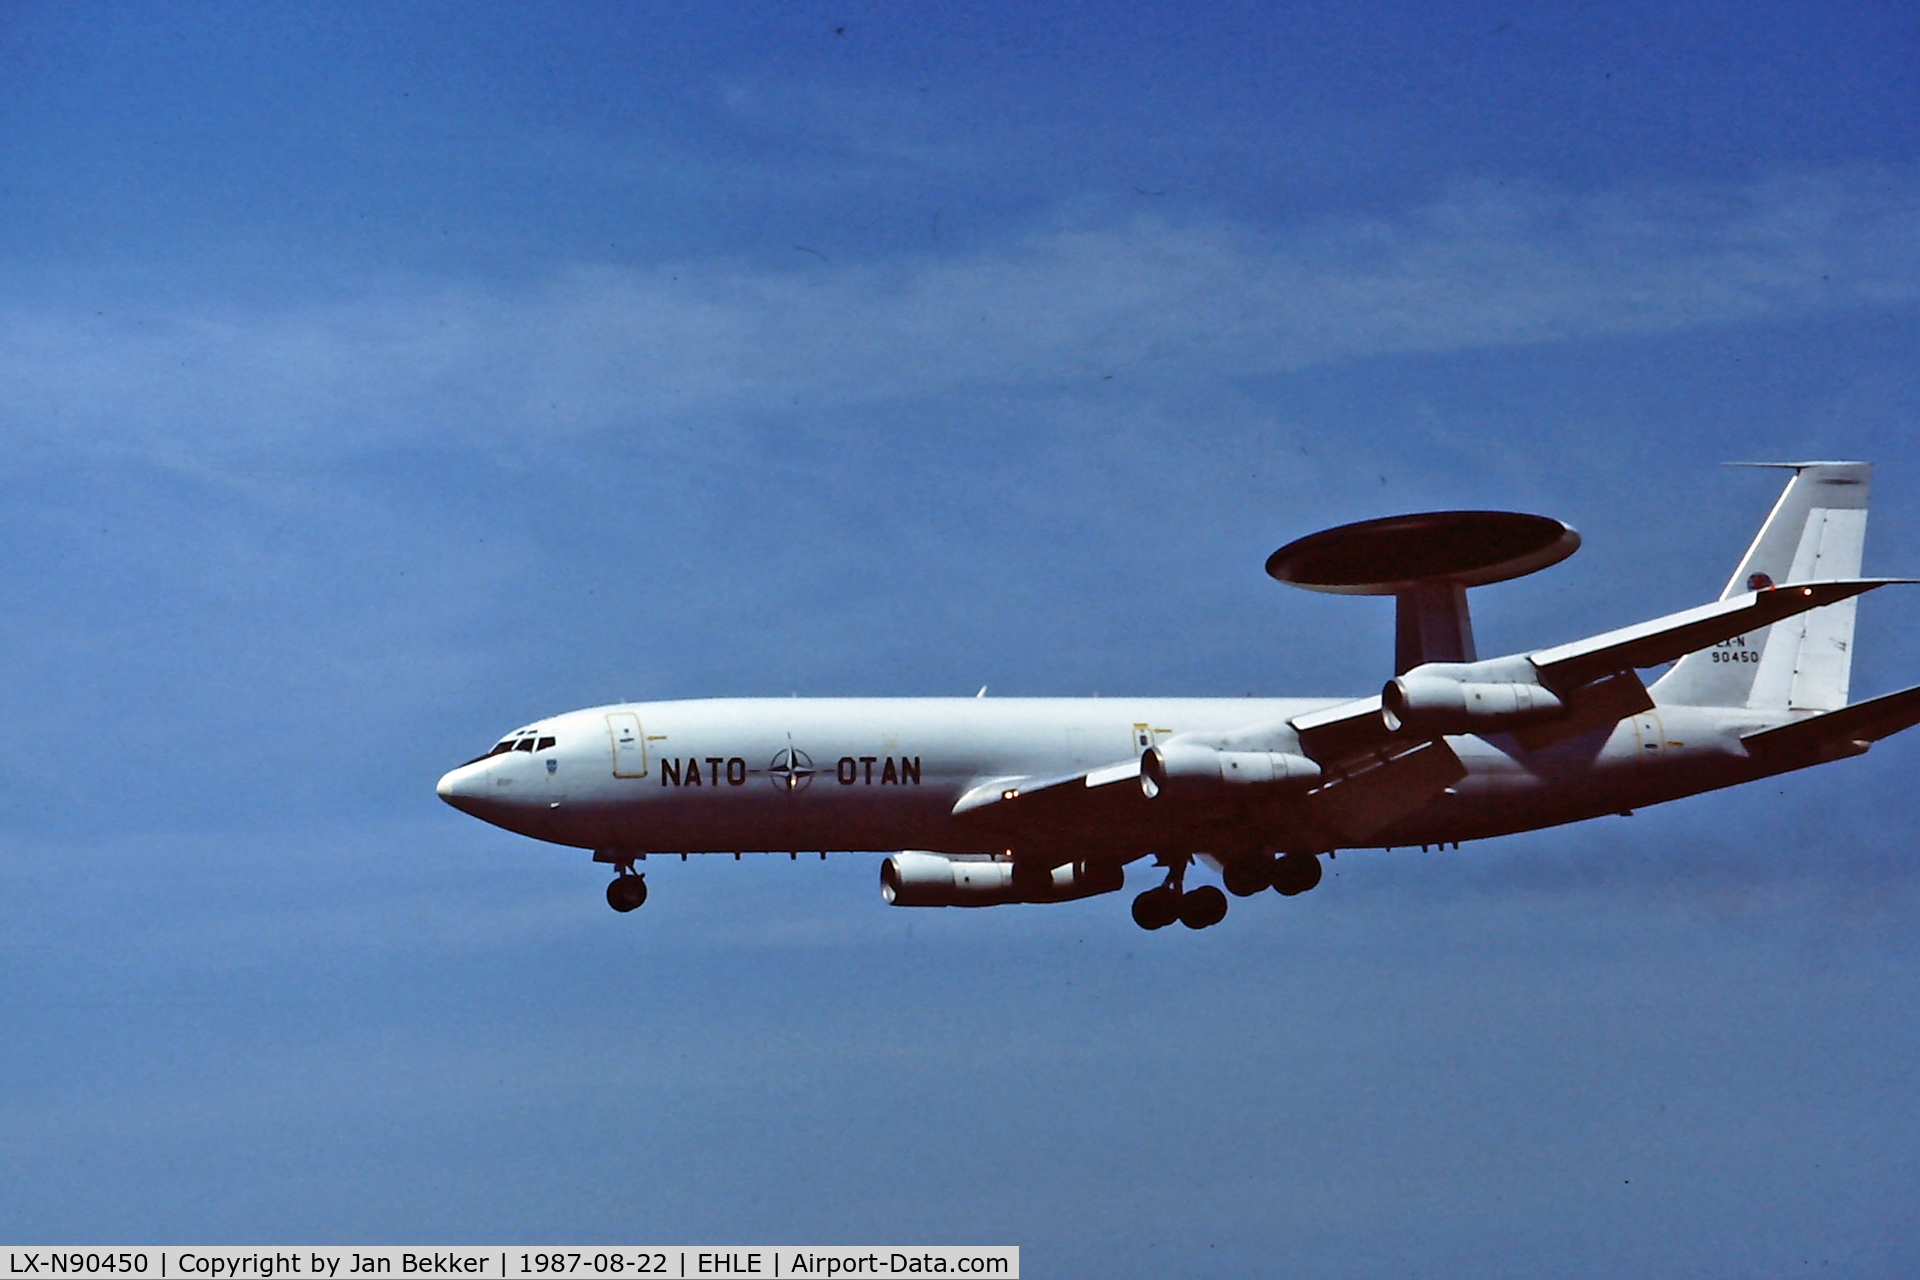 LX-N90450, 1979 Boeing E-3A Sentry C/N 22845, Lowpass over Lelystad Airport's Airshow